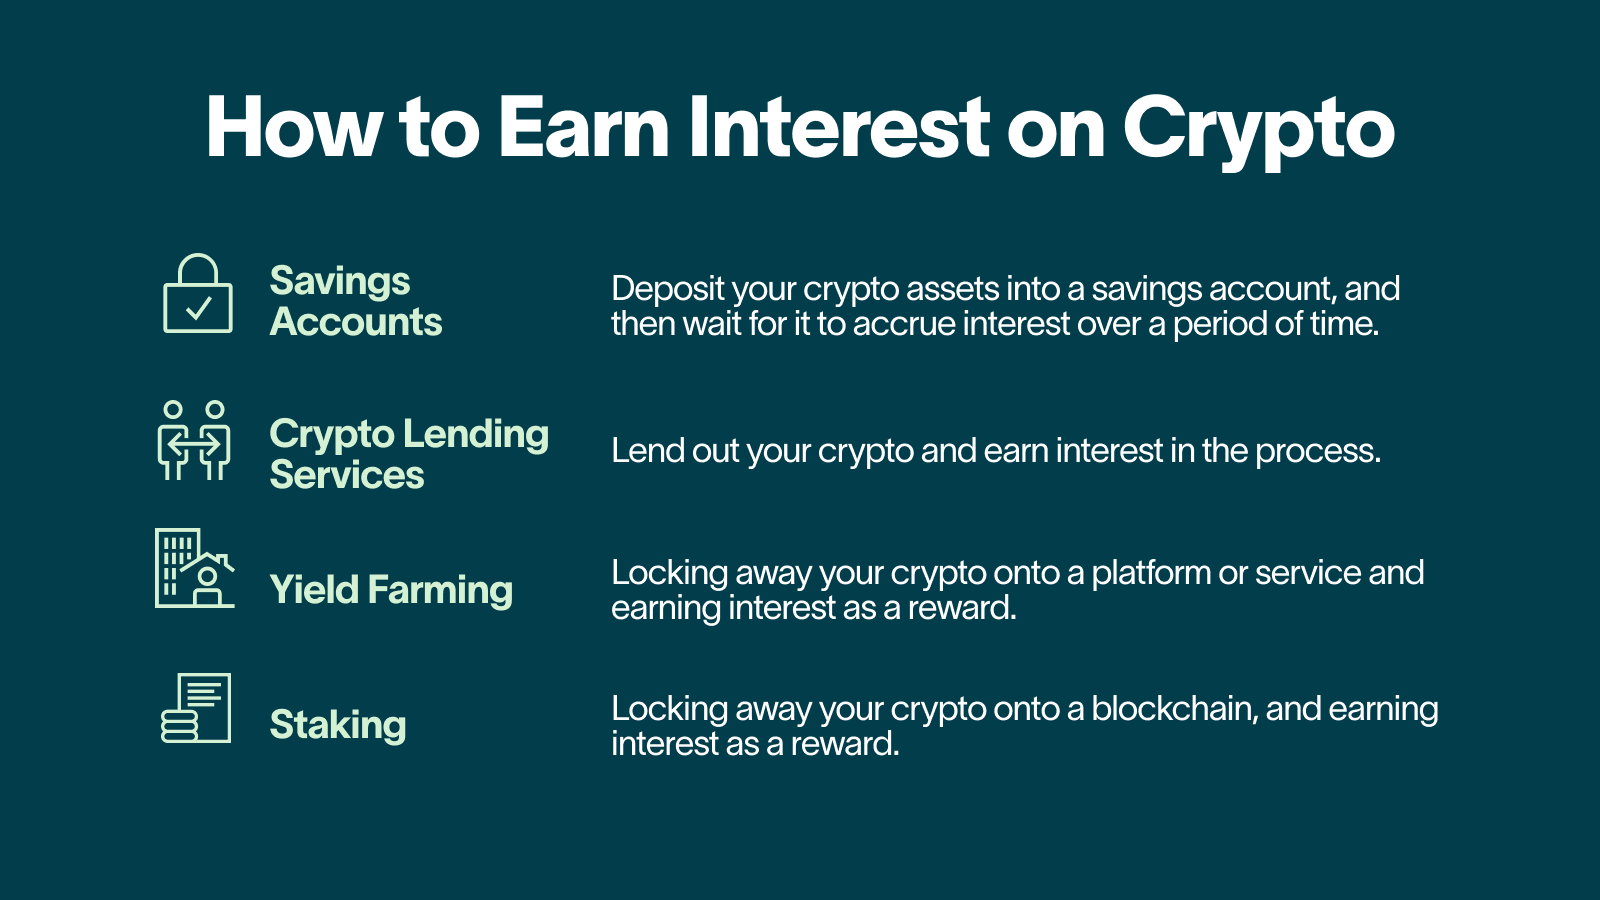 How to earn interest on crypto graphic